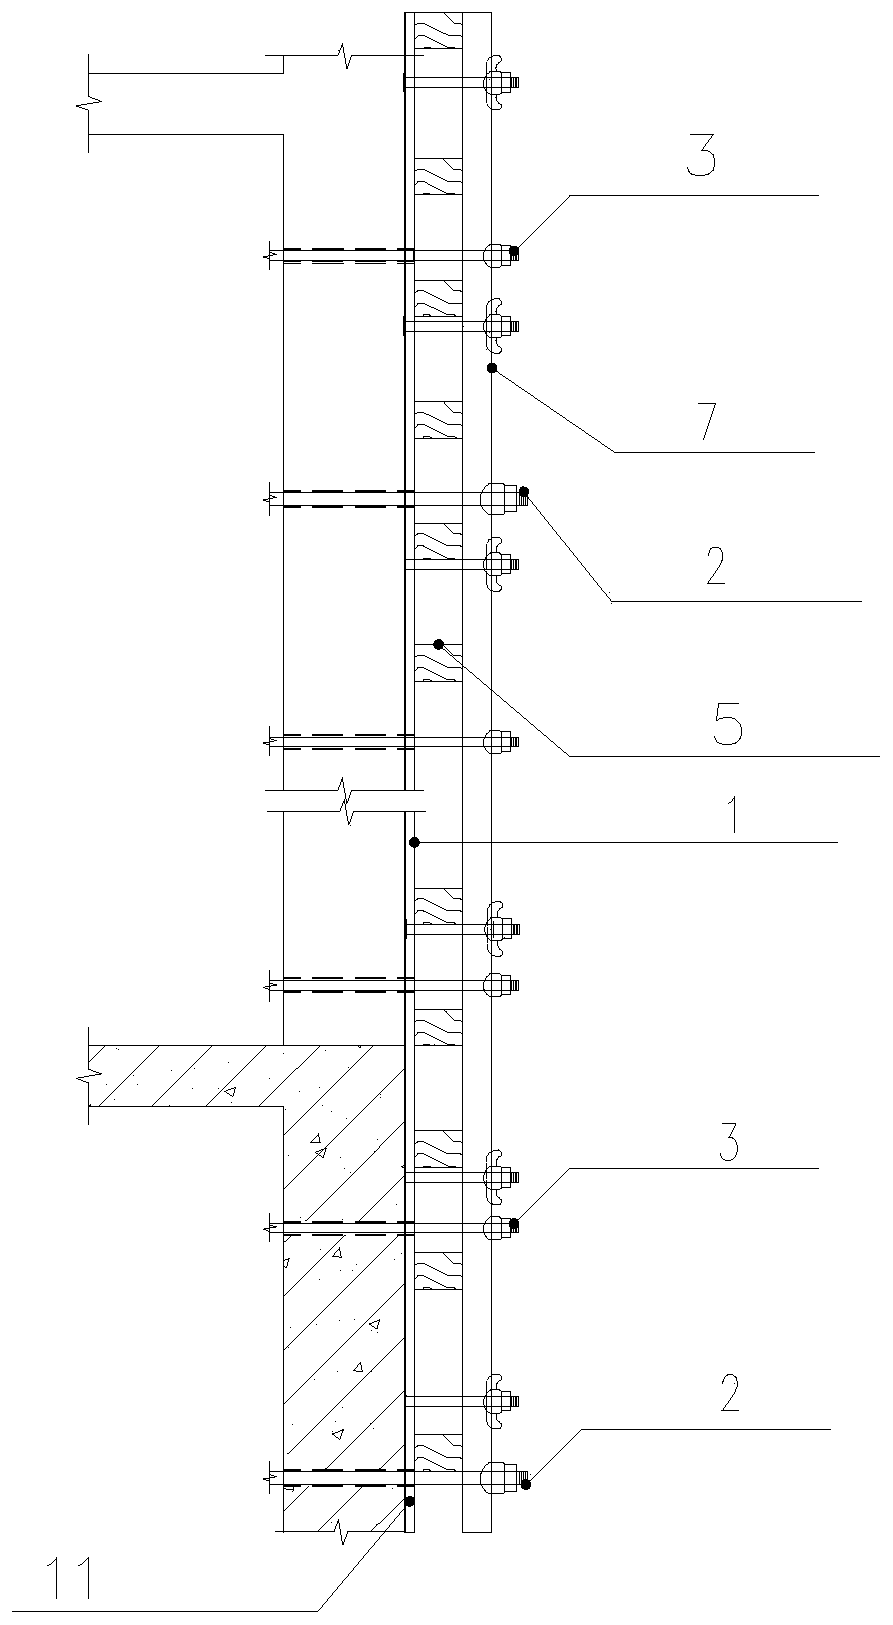 An internal formwork structure and construction method for elevator shaft construction